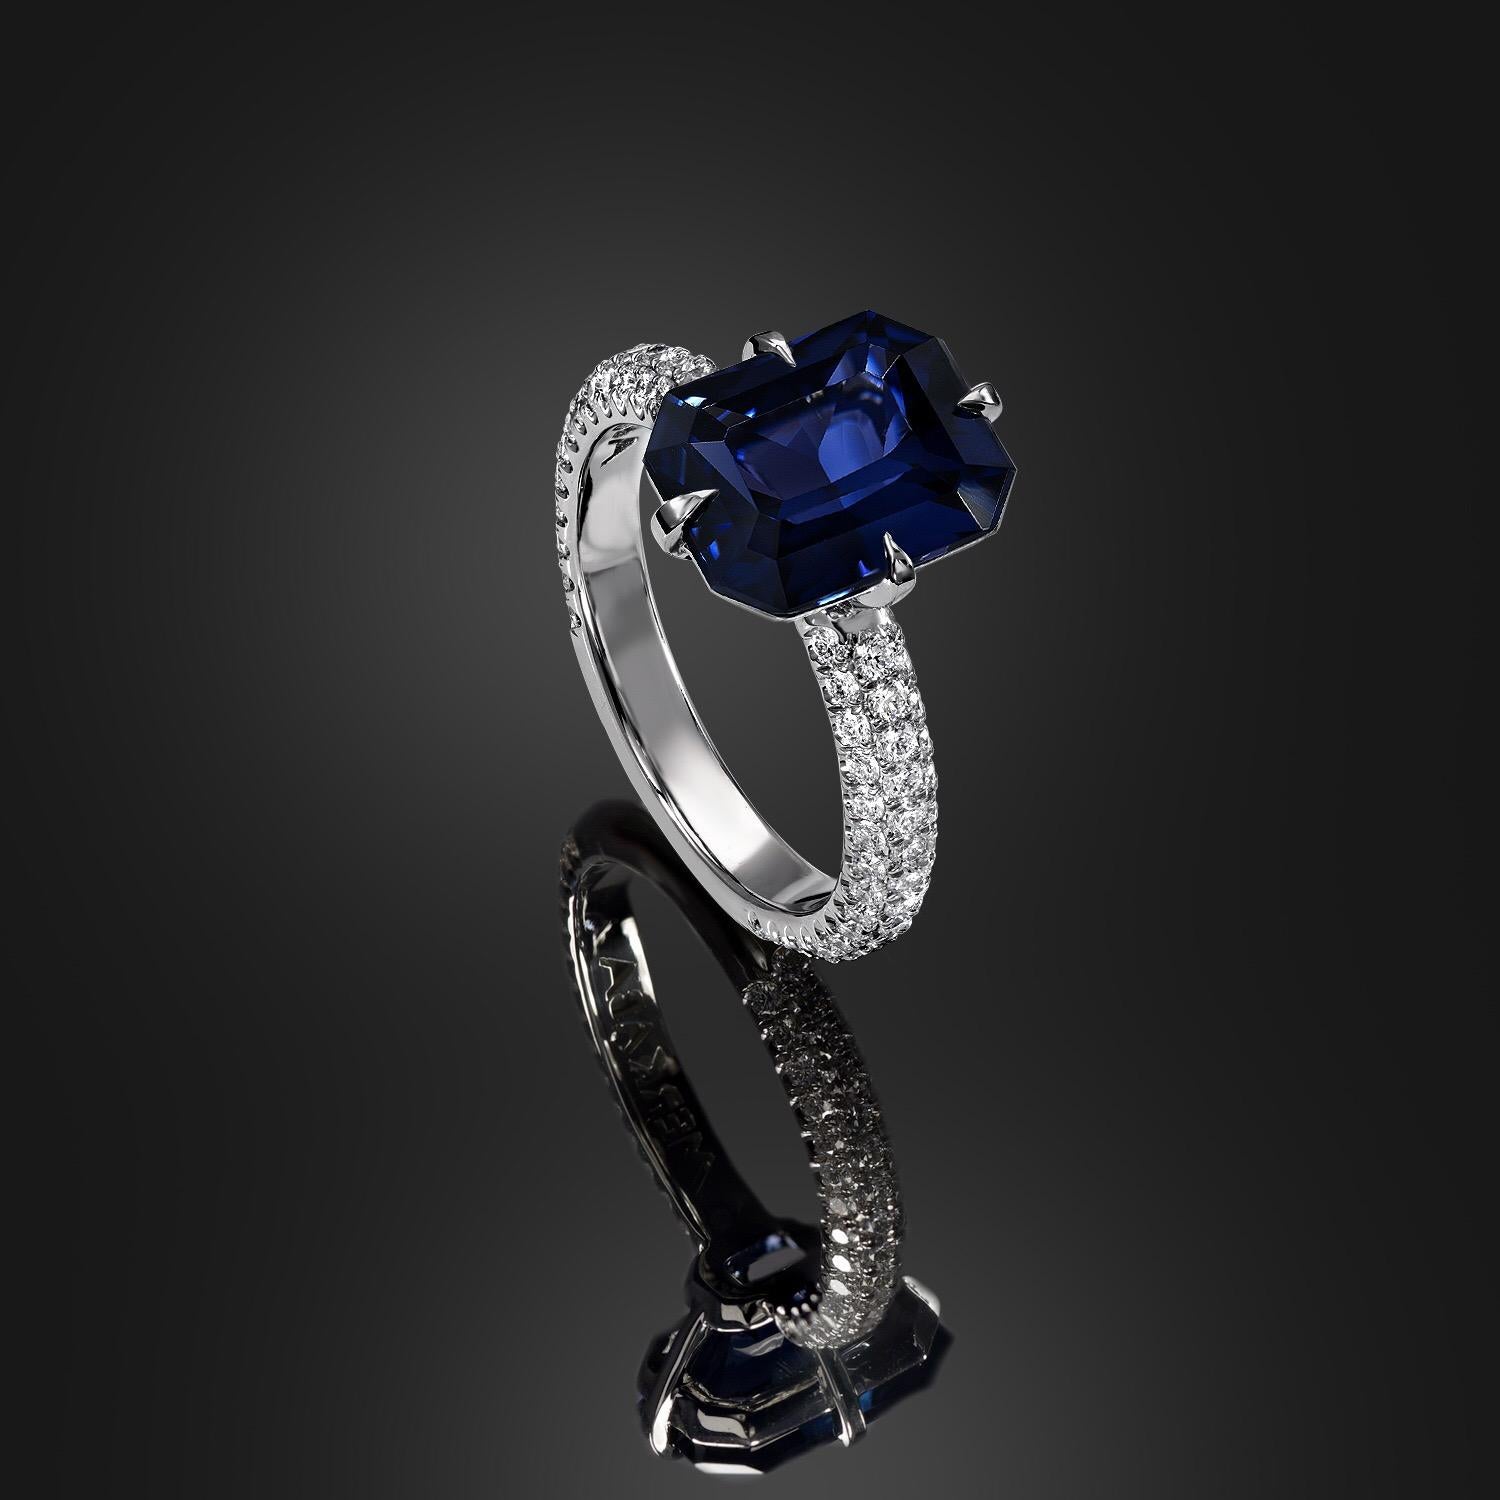 Women's Blue Spinel Ring 4.01 Carat Emerald Cut For Sale